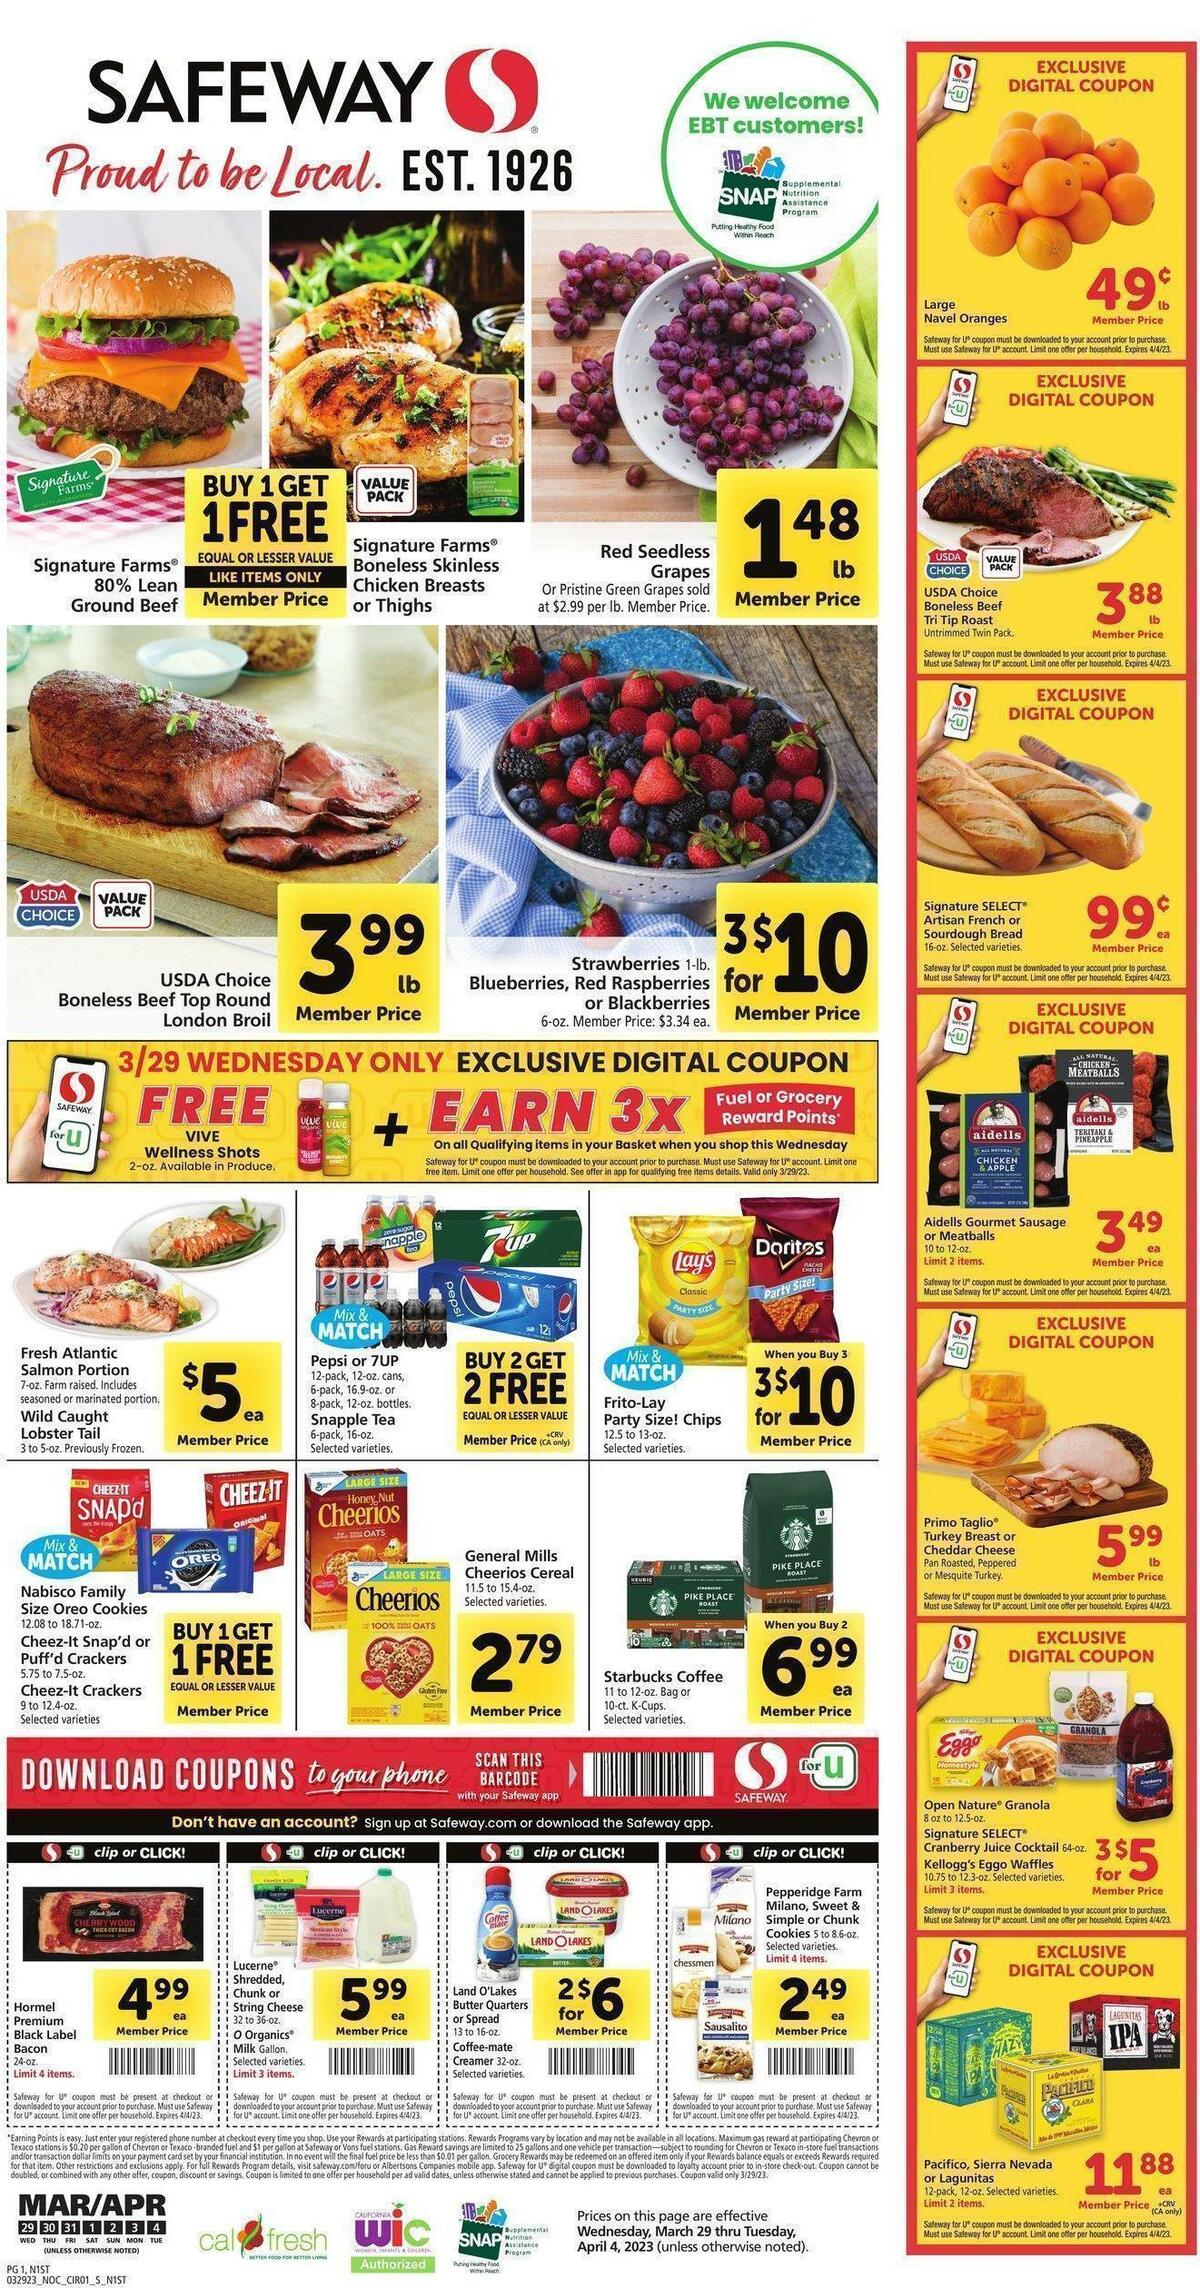 Safeway Weekly Ads & Special Buys from March 29